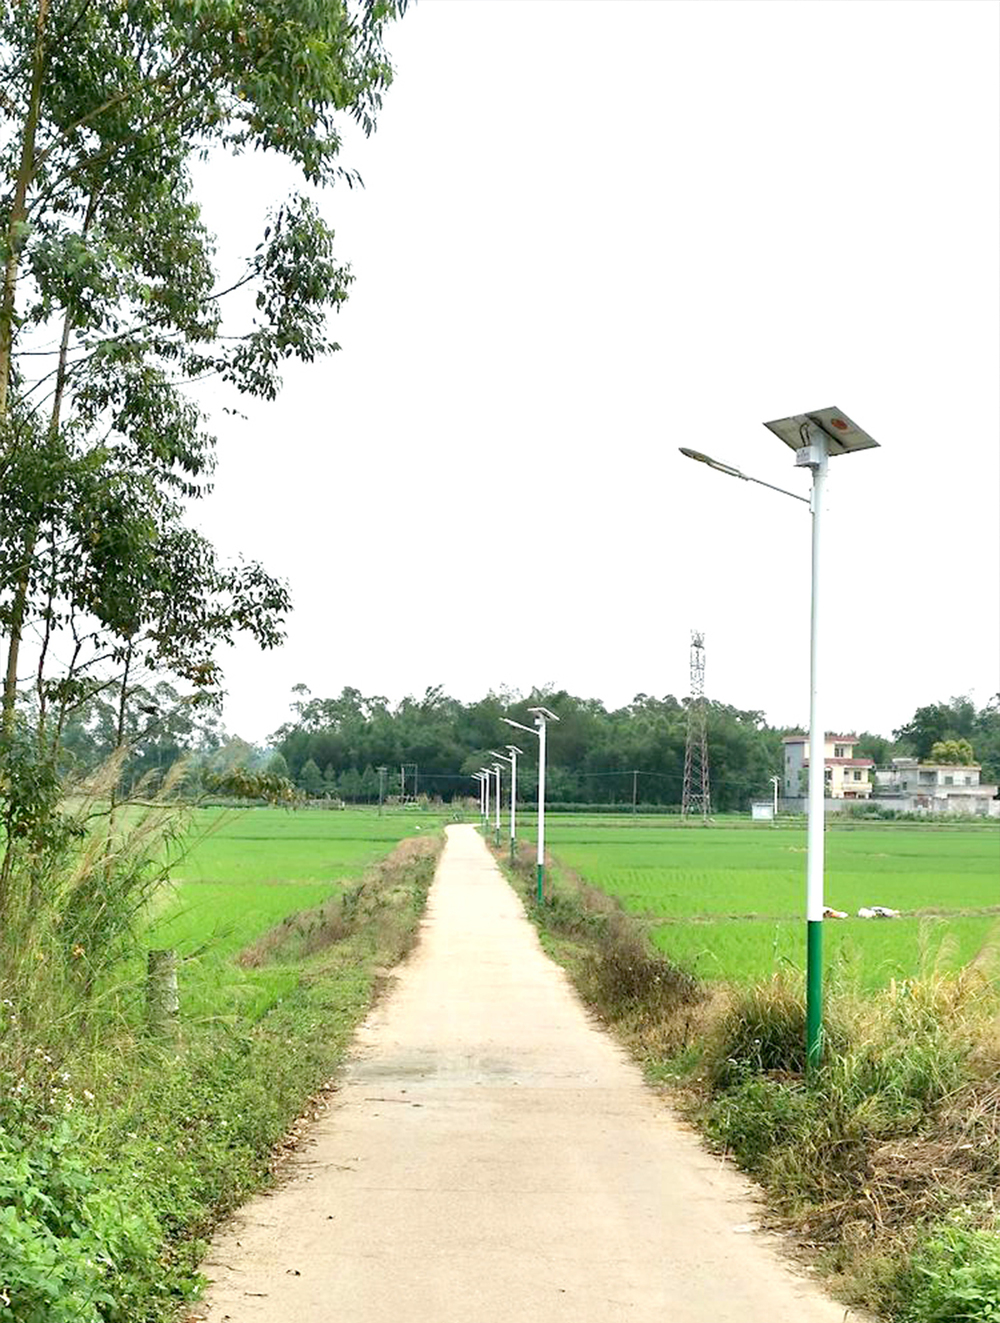 Super bright outdoor new rural road lighting, street lamps, LED street lamps